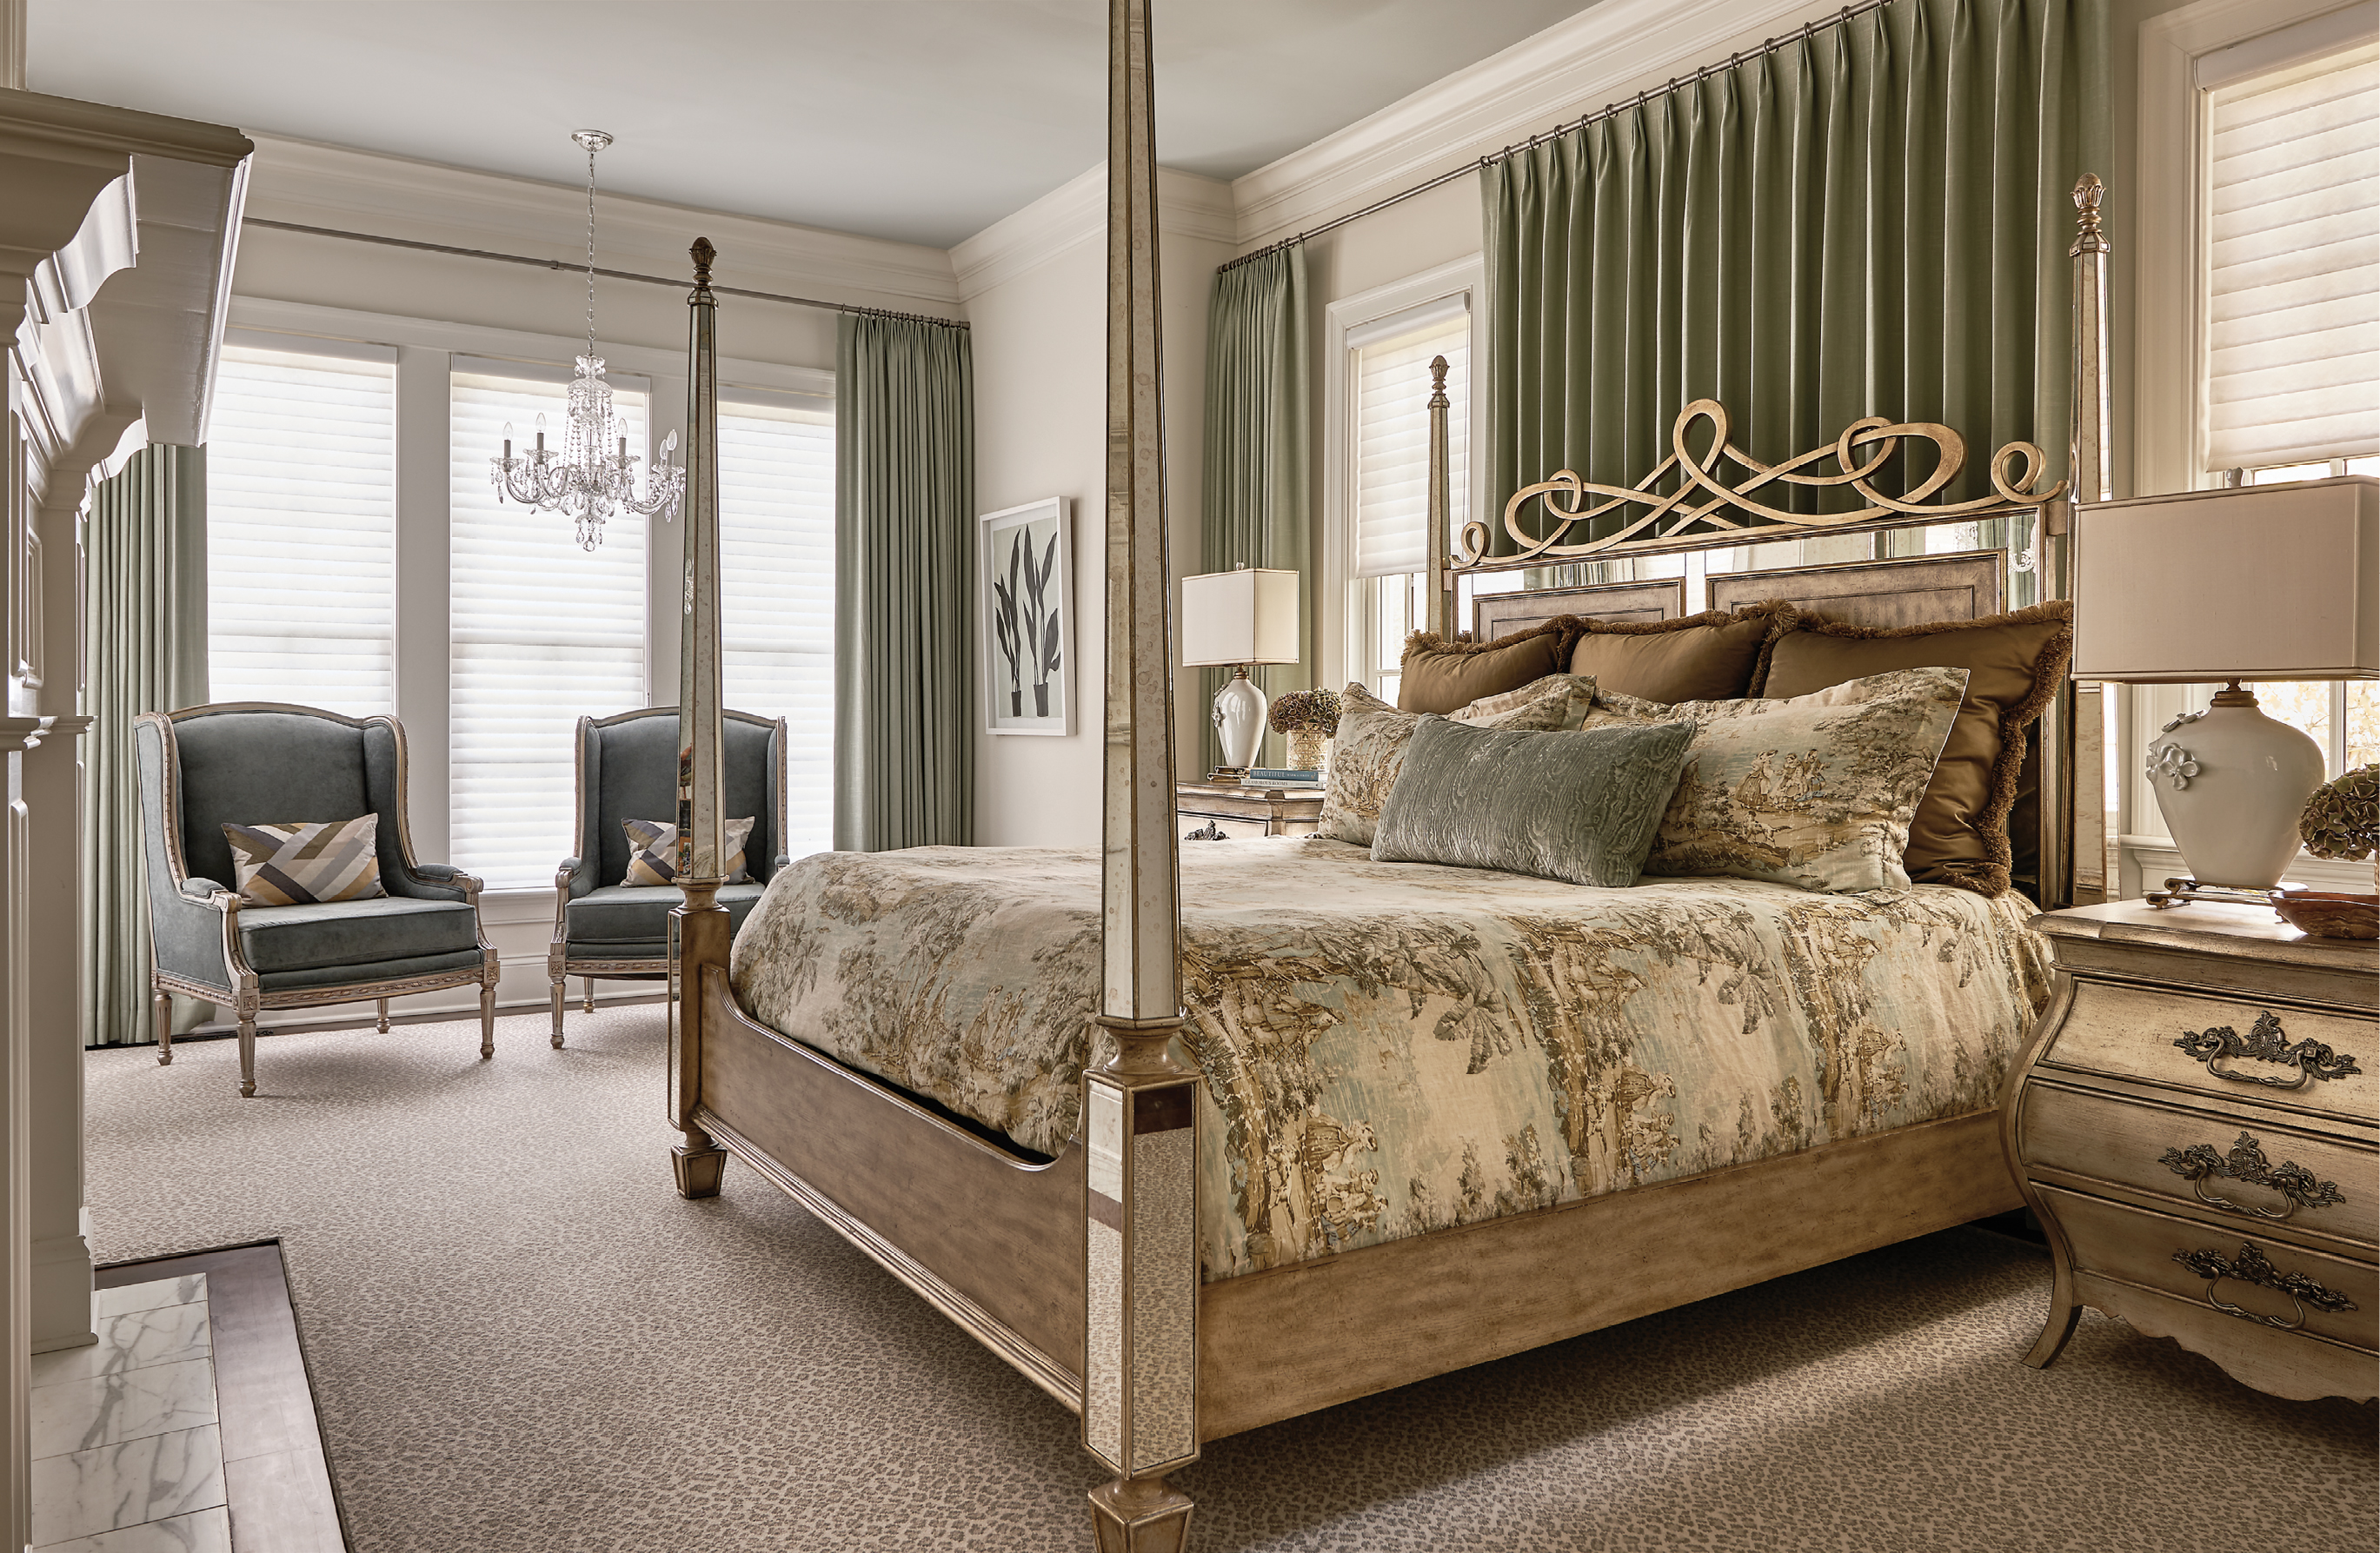 In the master bedroom, greens, golds, and beiges combine to create a soothing palette, with some playful features in the form of a leopard print Stark carpet and Zoffany velvet-covered antique French chairs.